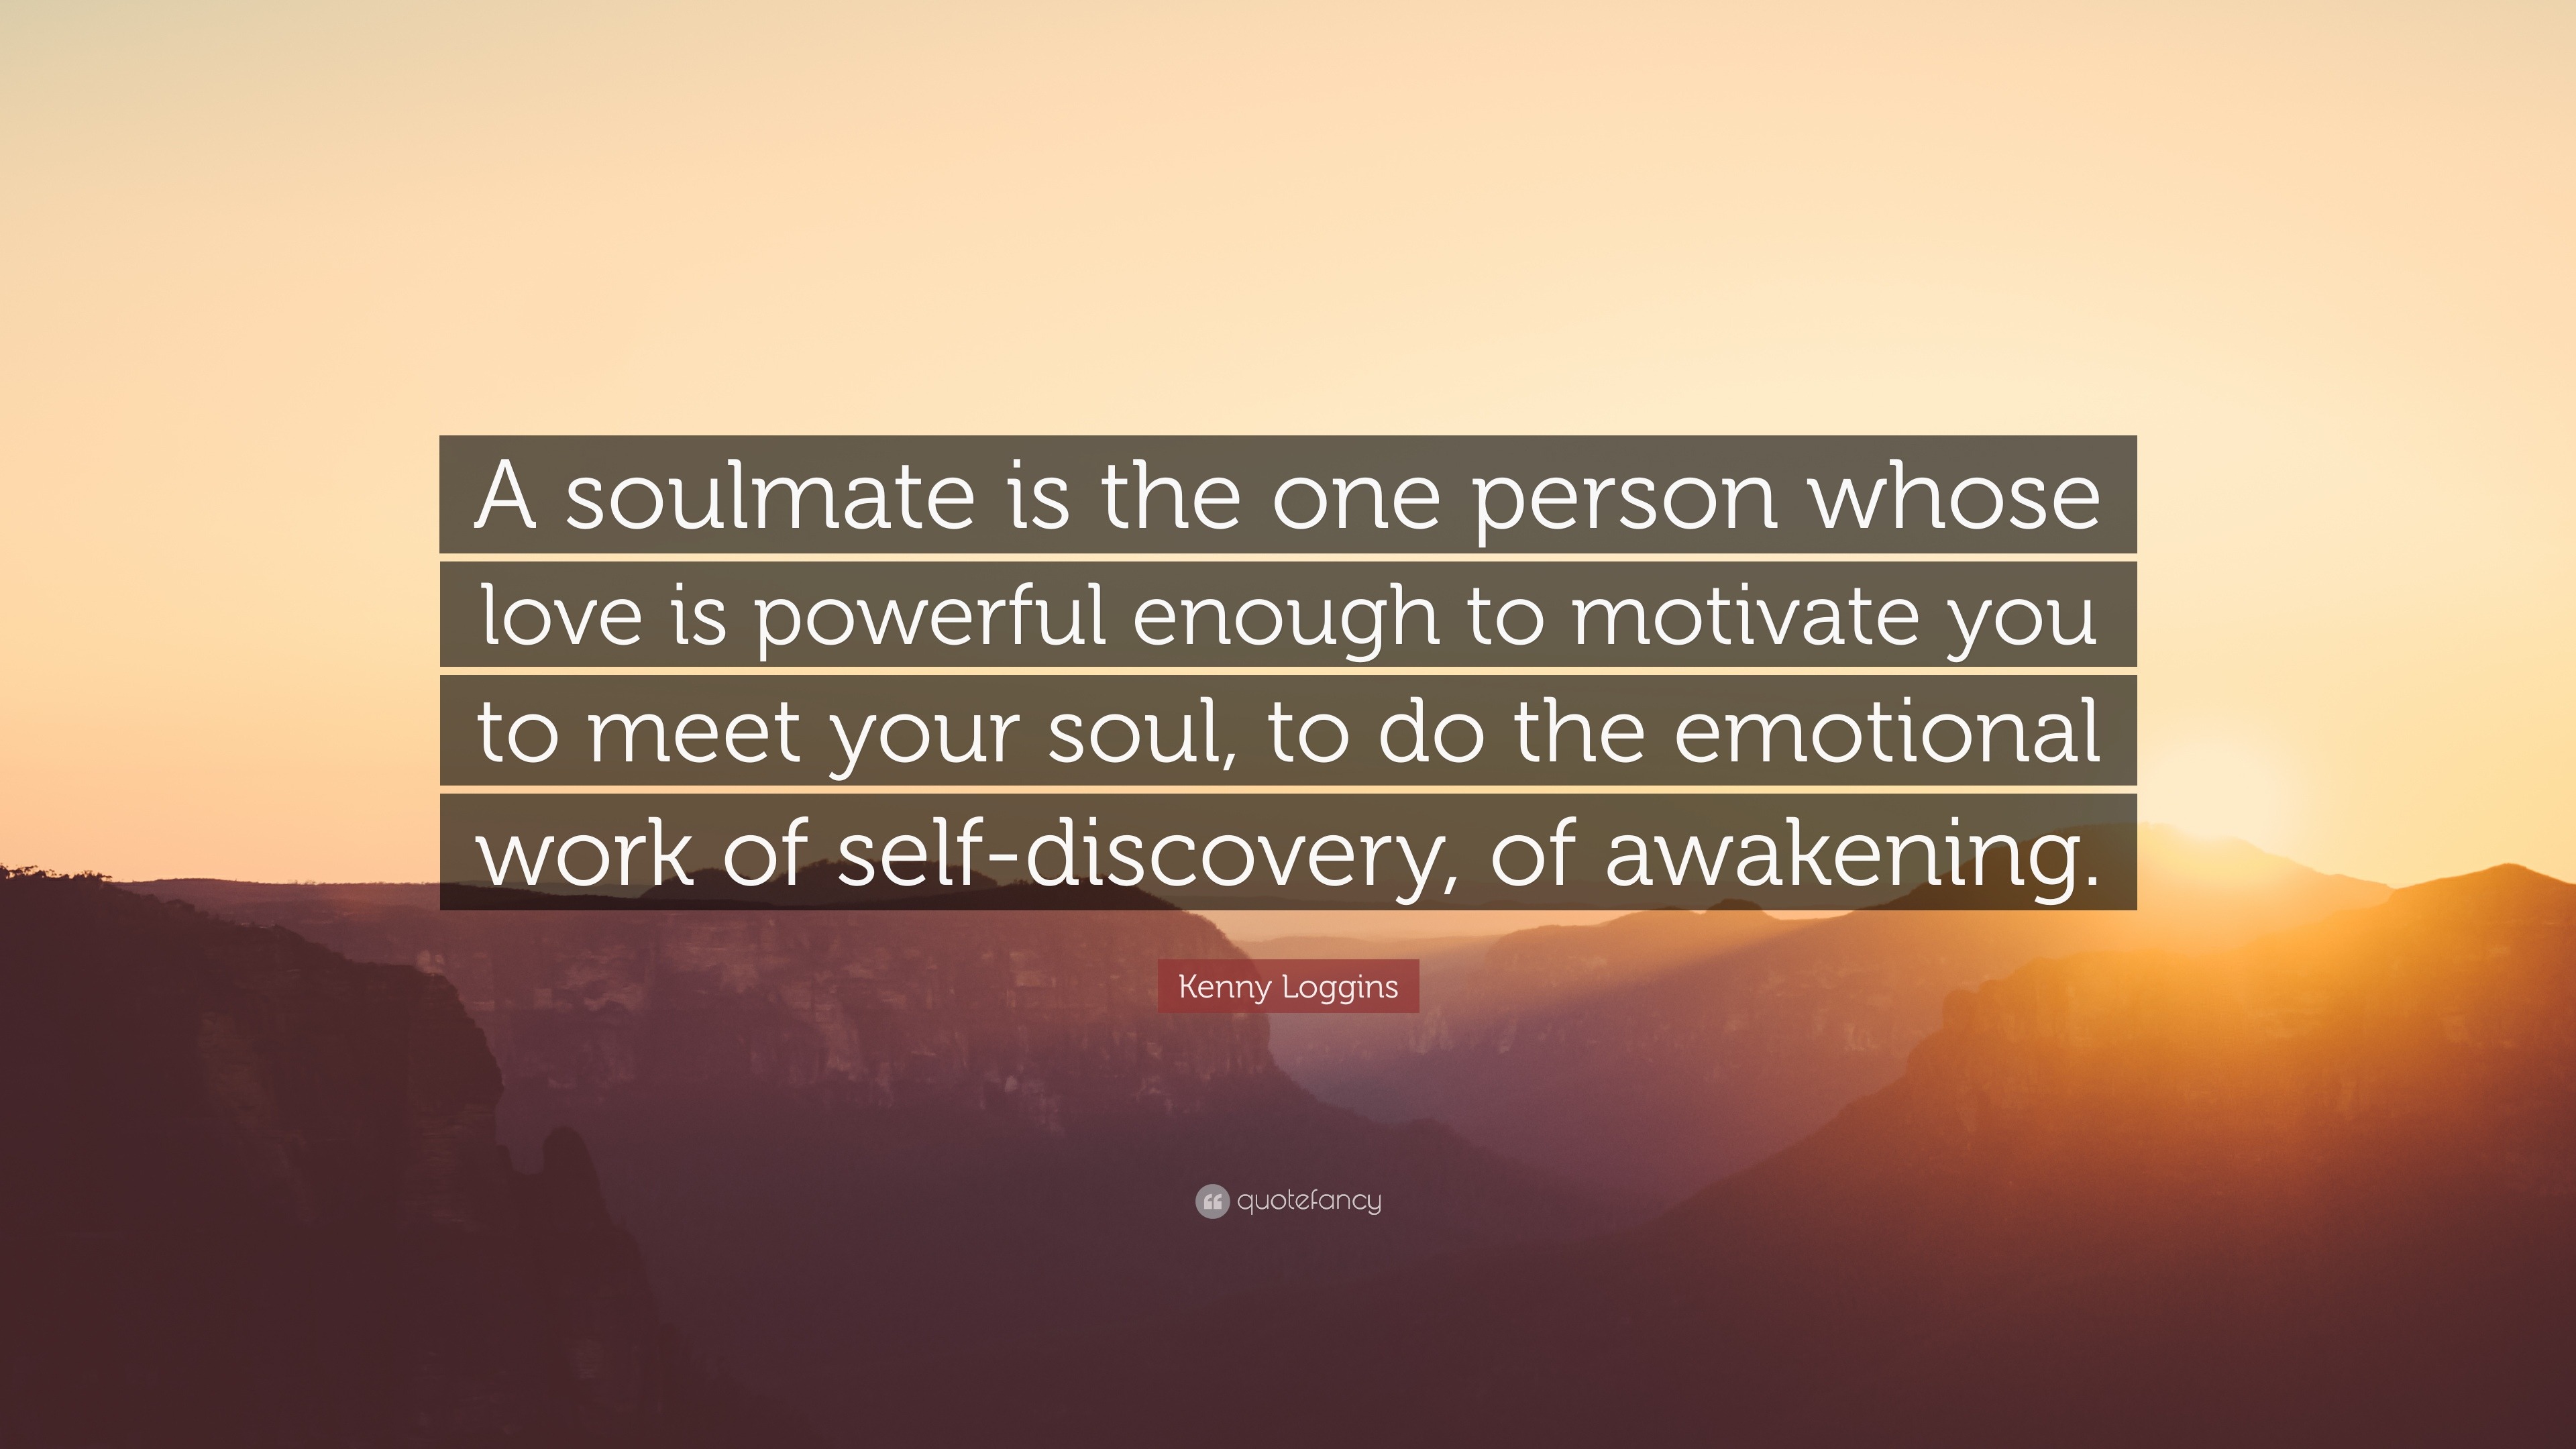 Kenny Loggins Quote “A soulmate is the one person whose love is powerful enough